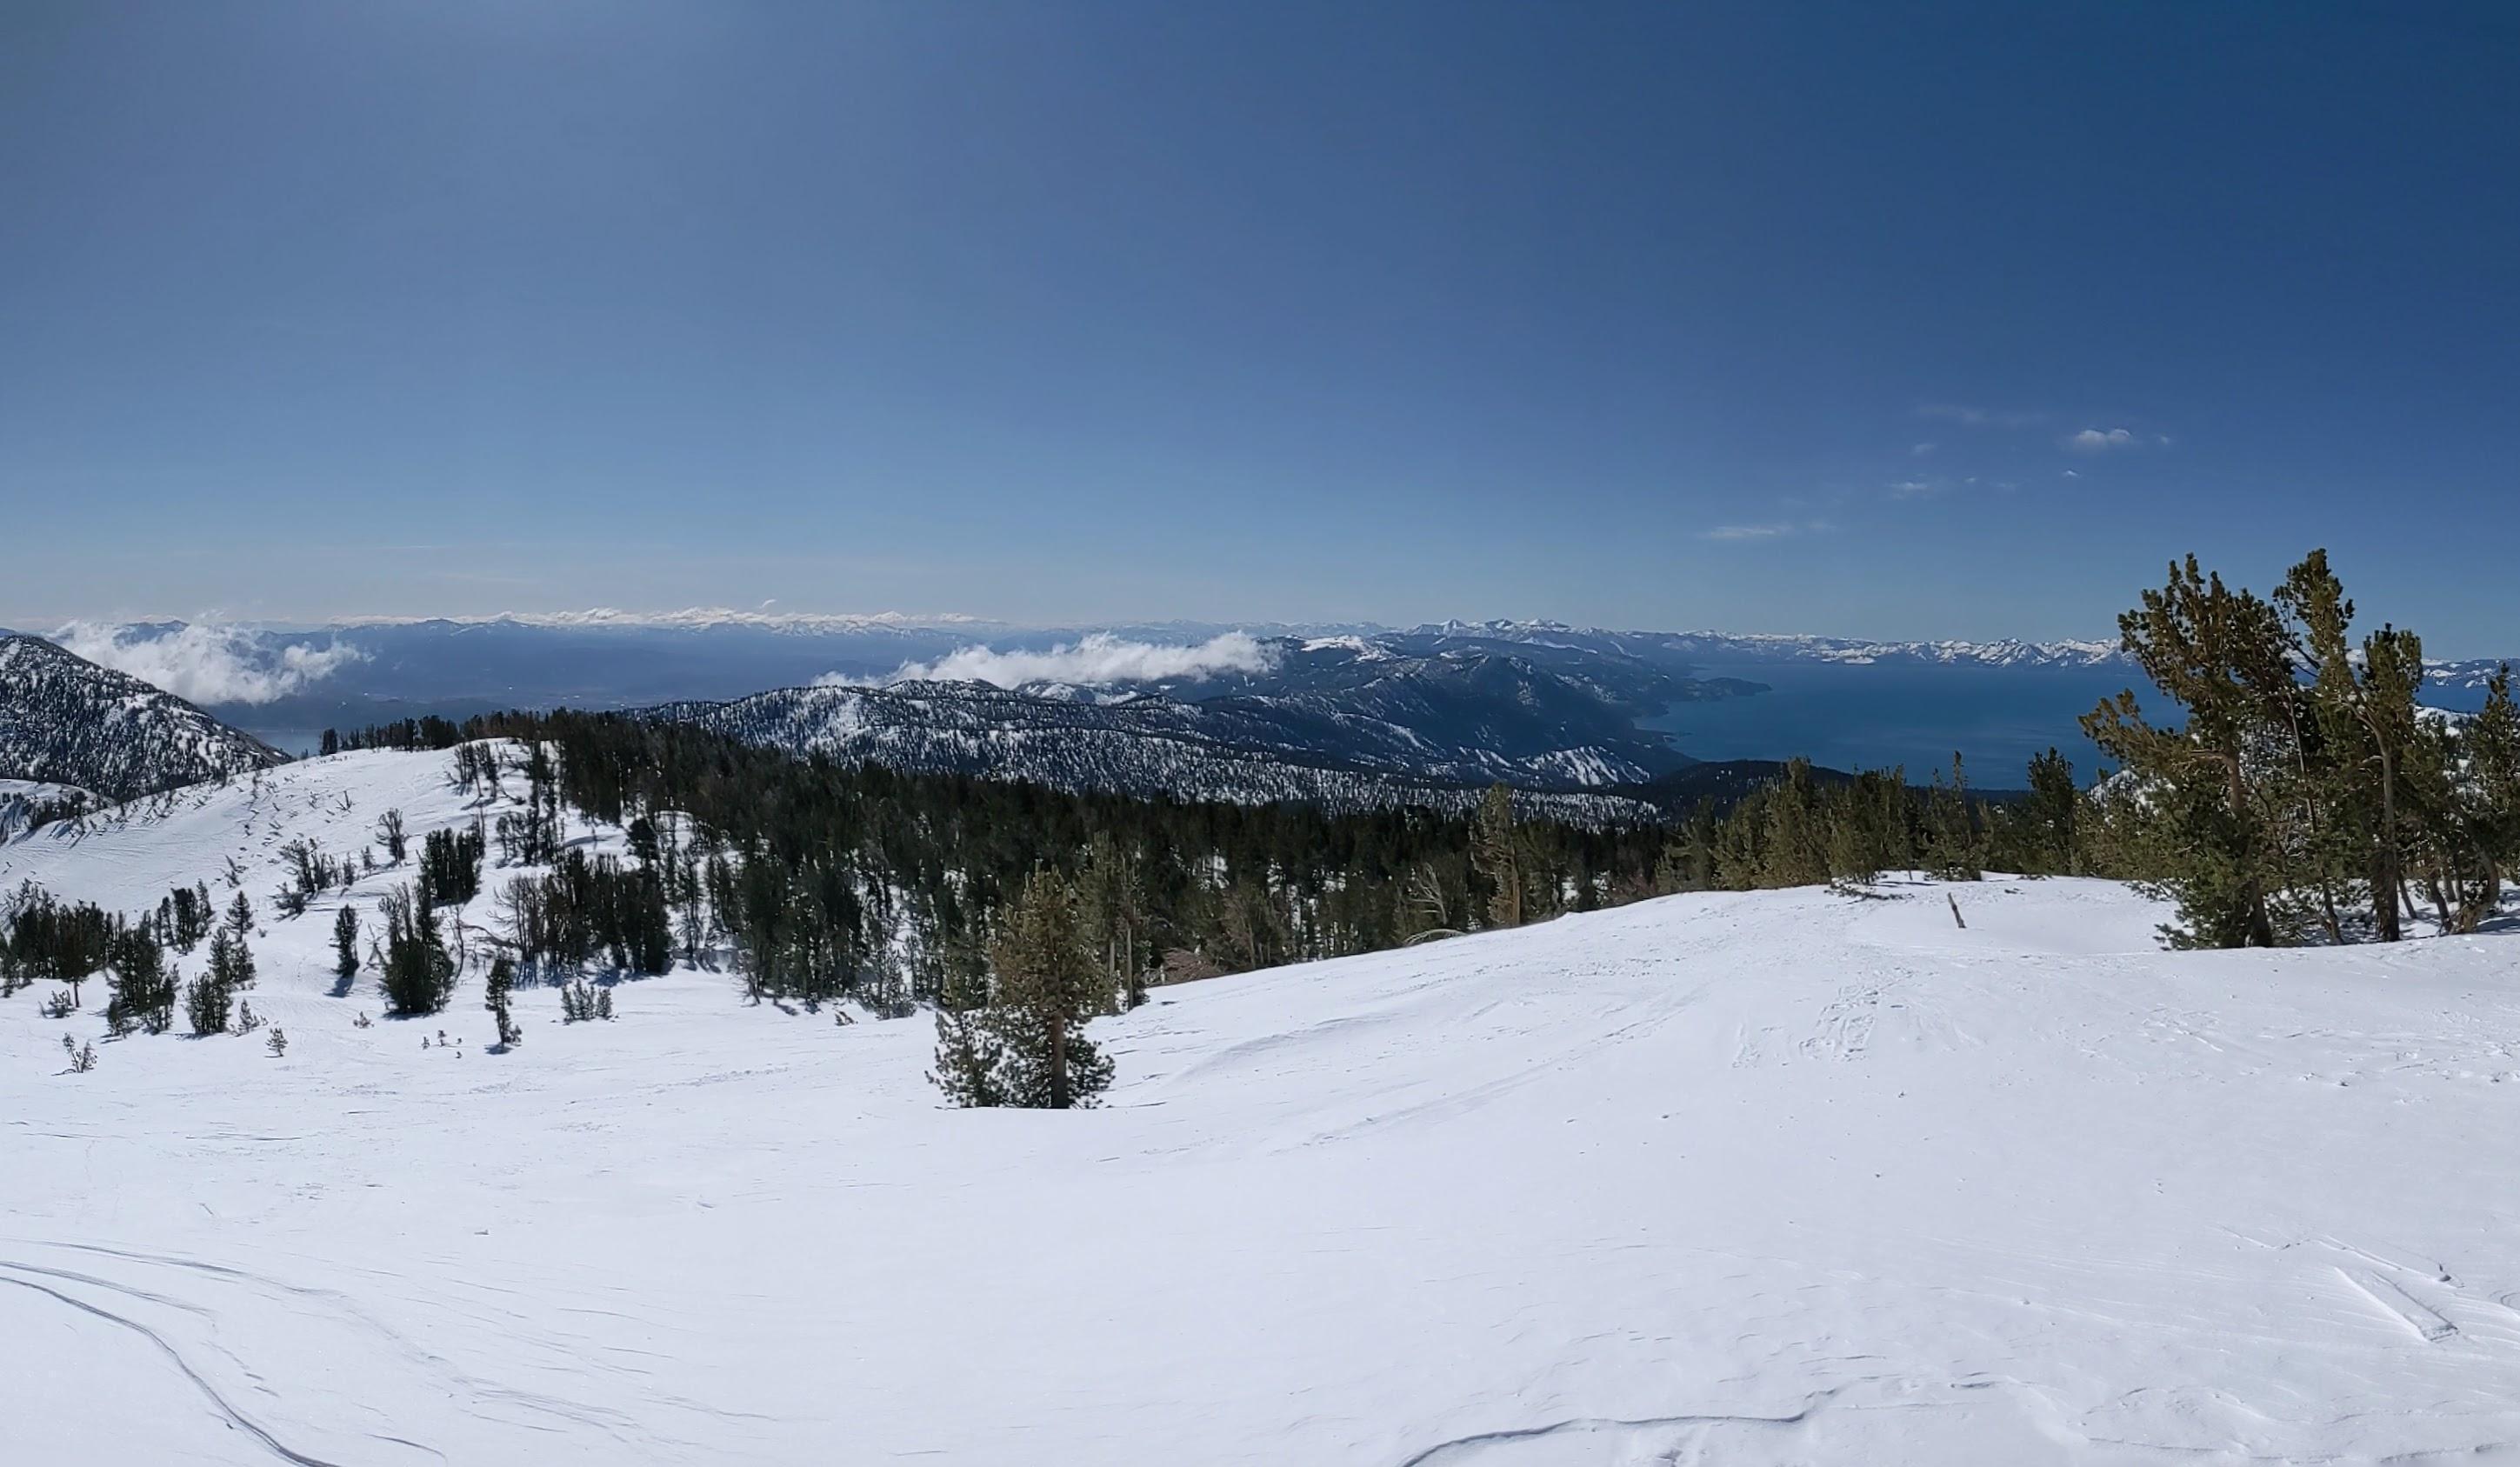 Carson valley to the left, lake Tahoe to the right